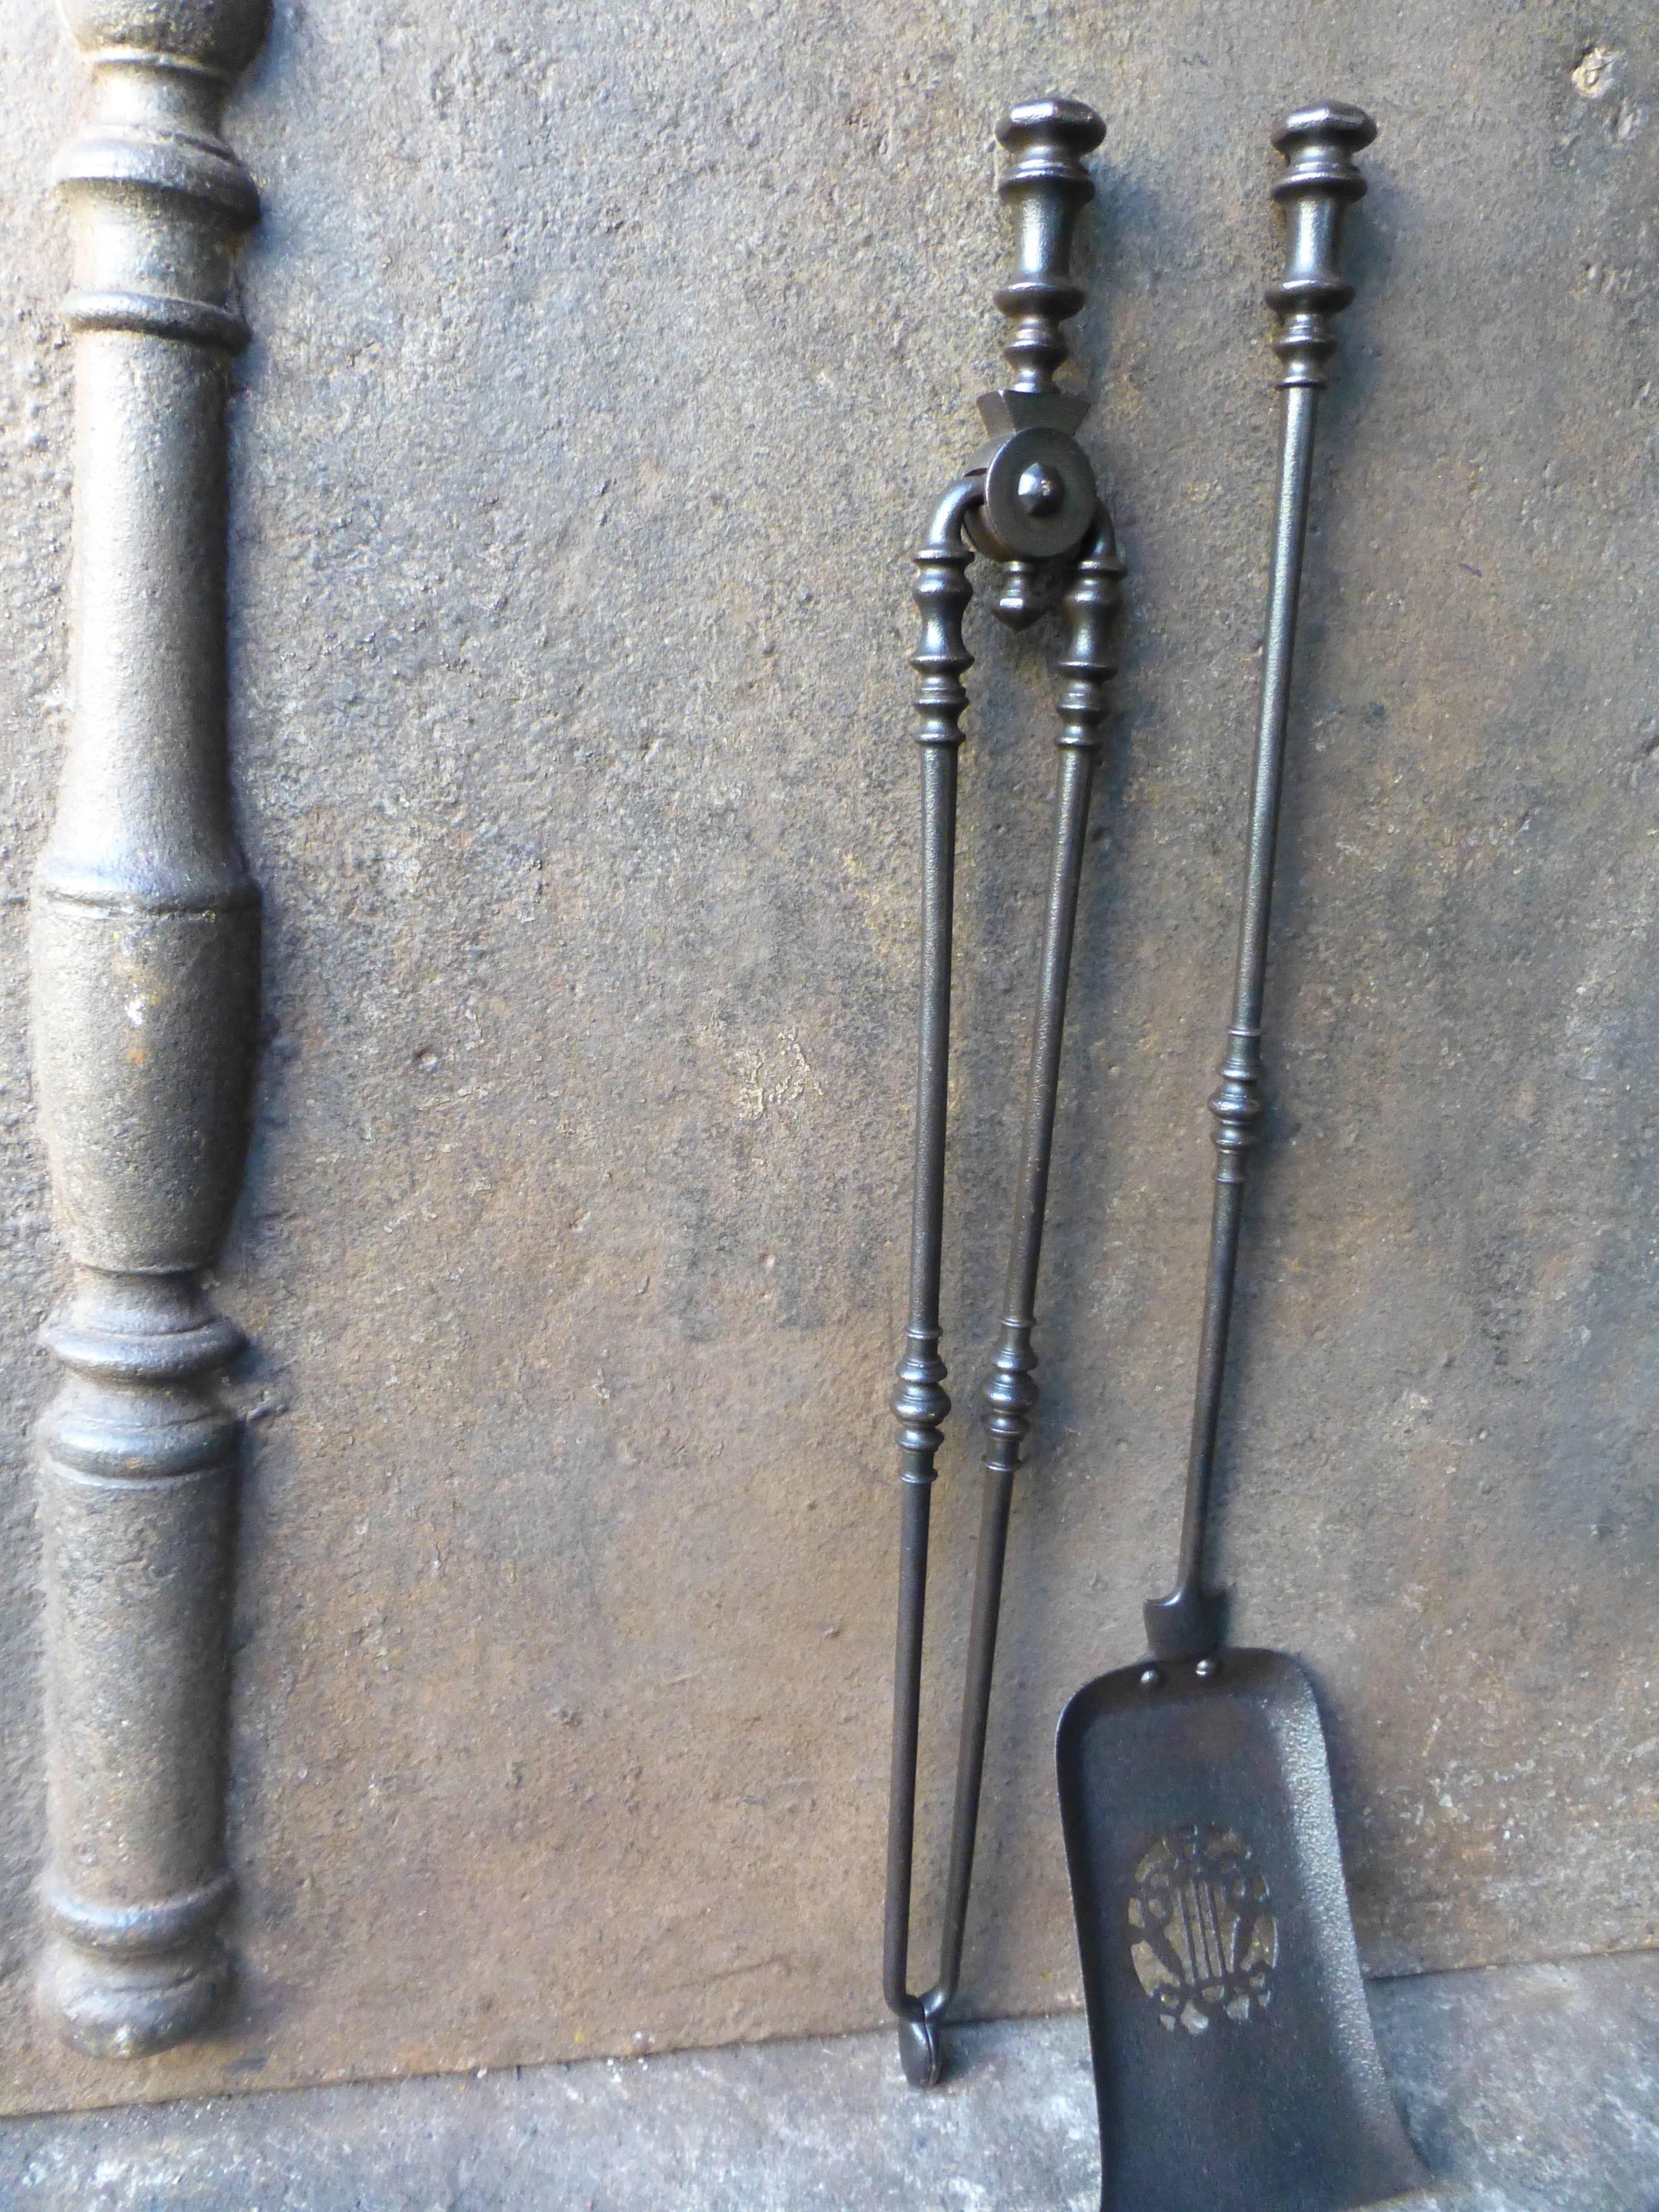 19th century English fire irons, fire tools.

We have a unique and specialized collection of antique and used fireplace accessories consisting of more than 1000 listings at 1stdibs. Amongst others we always have 300+ firebacks, 250+ pairs of